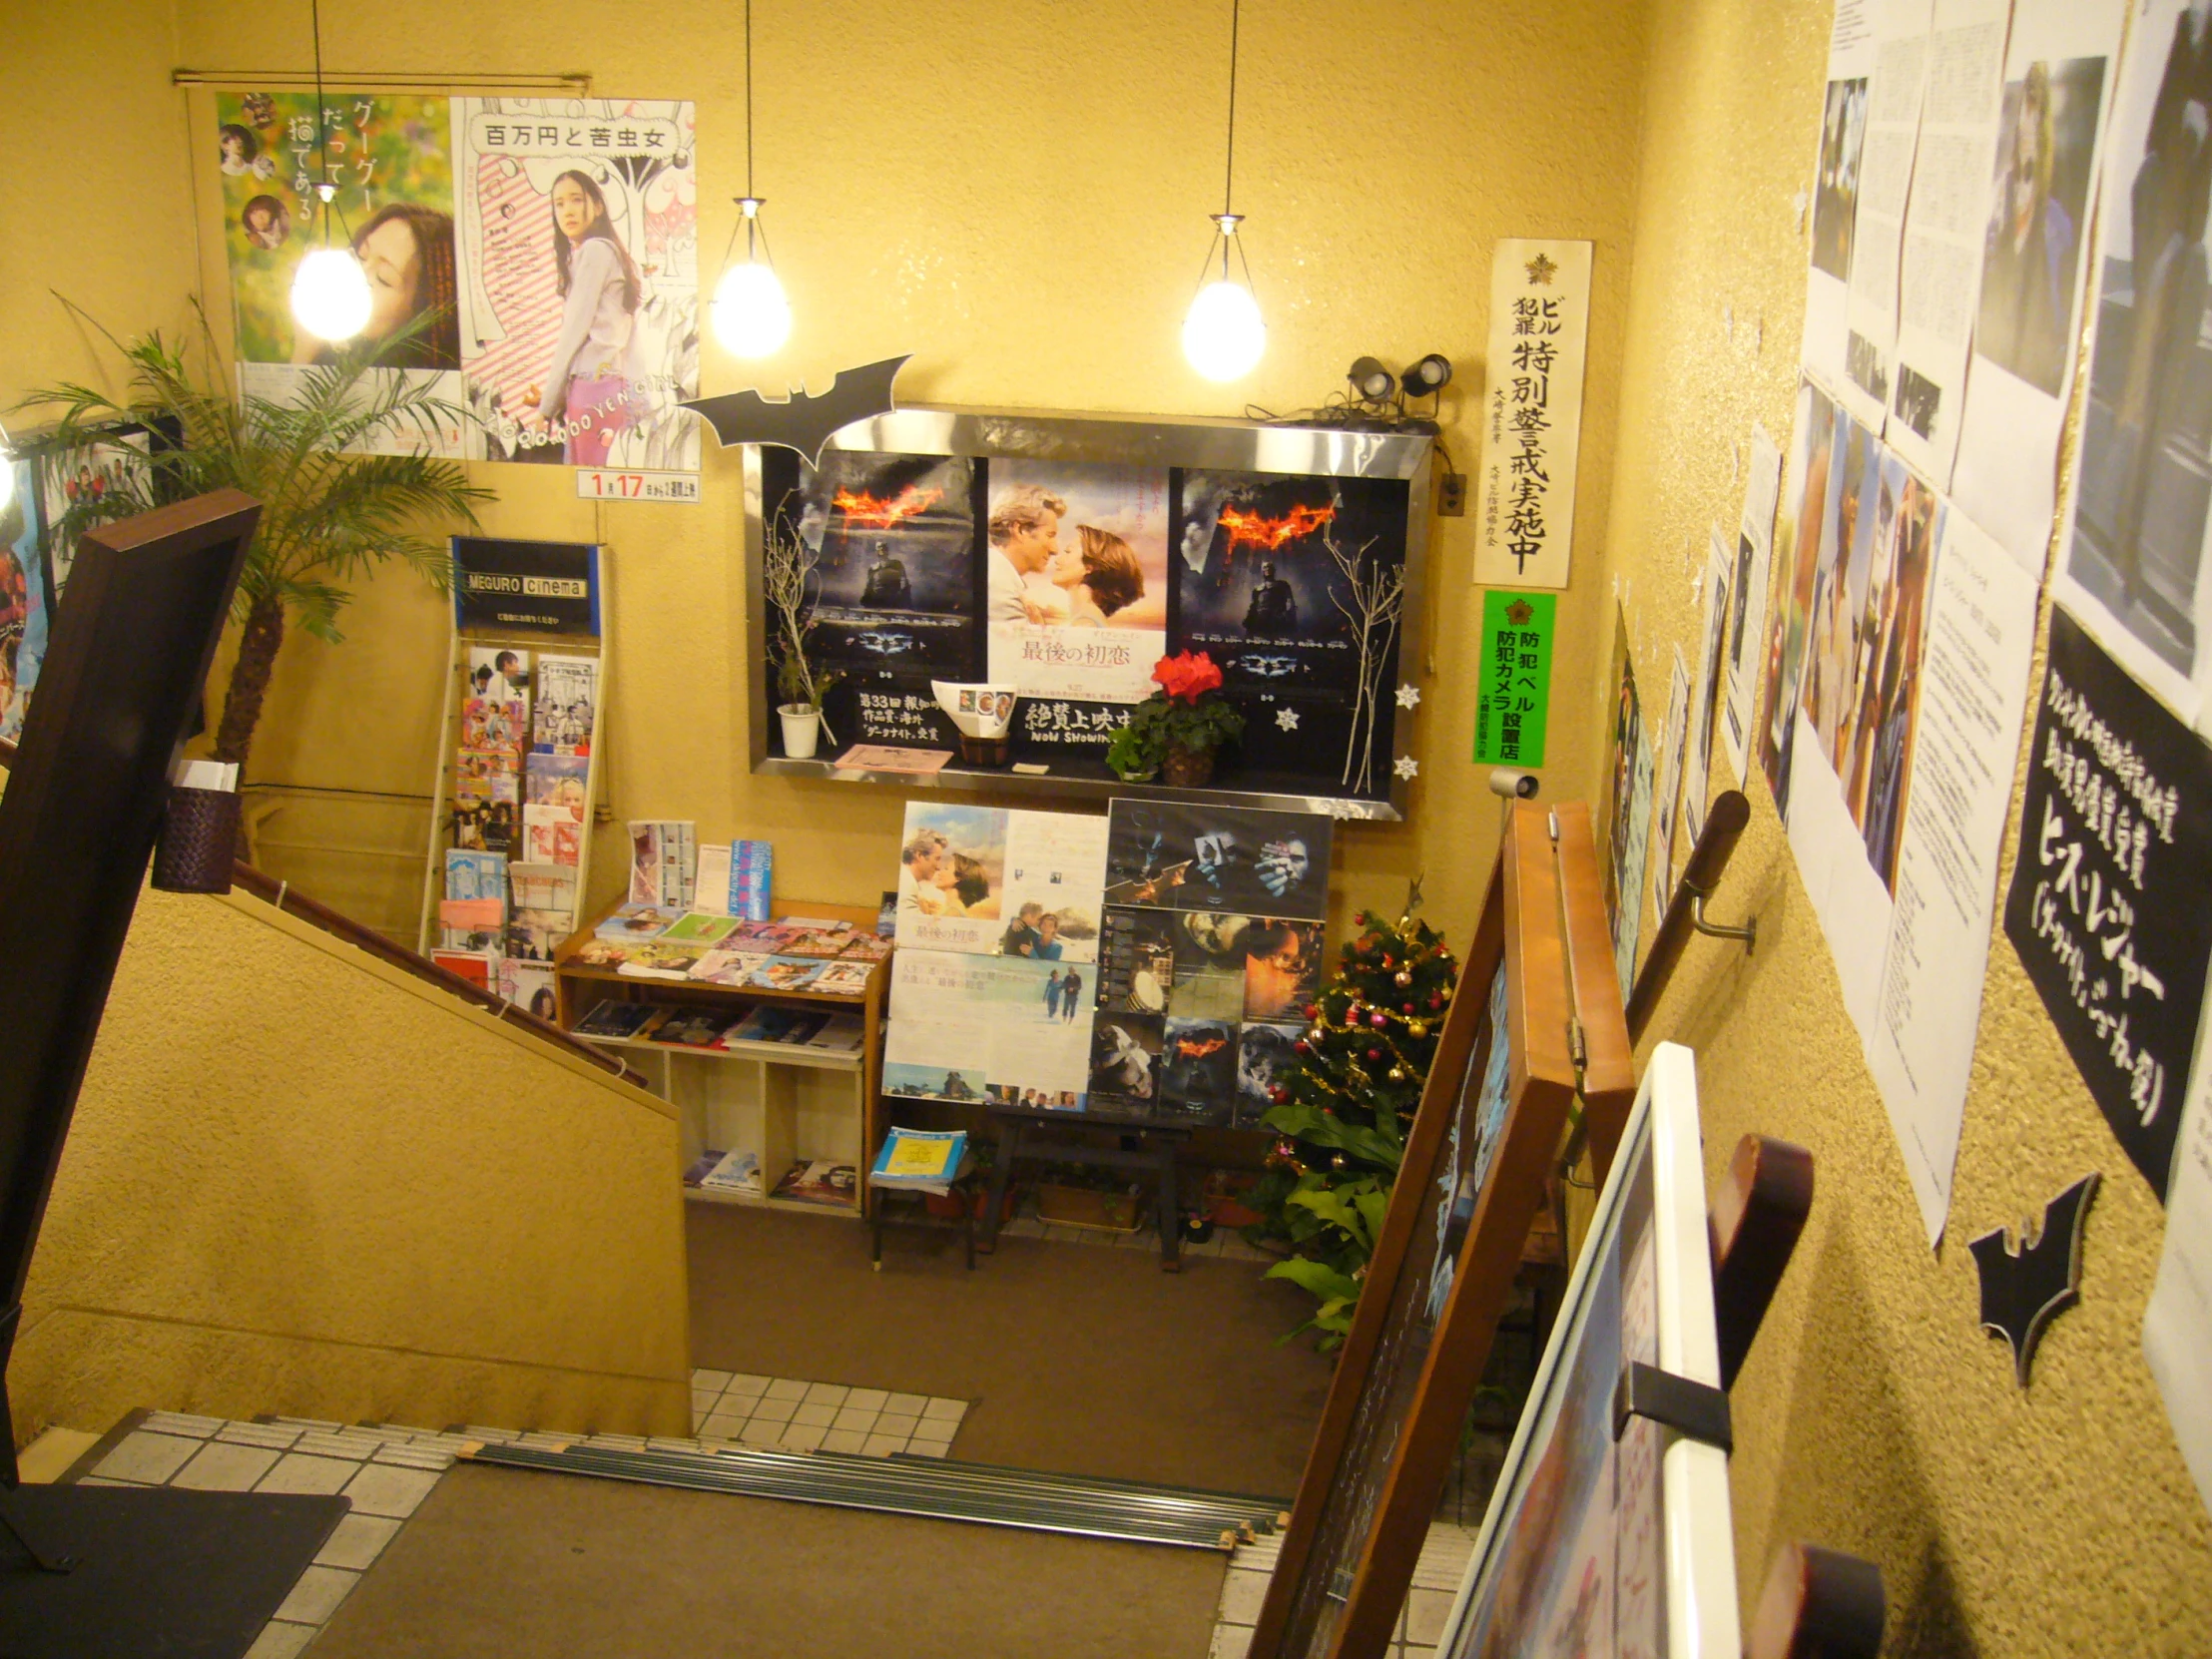 an image of a room with posters and pos